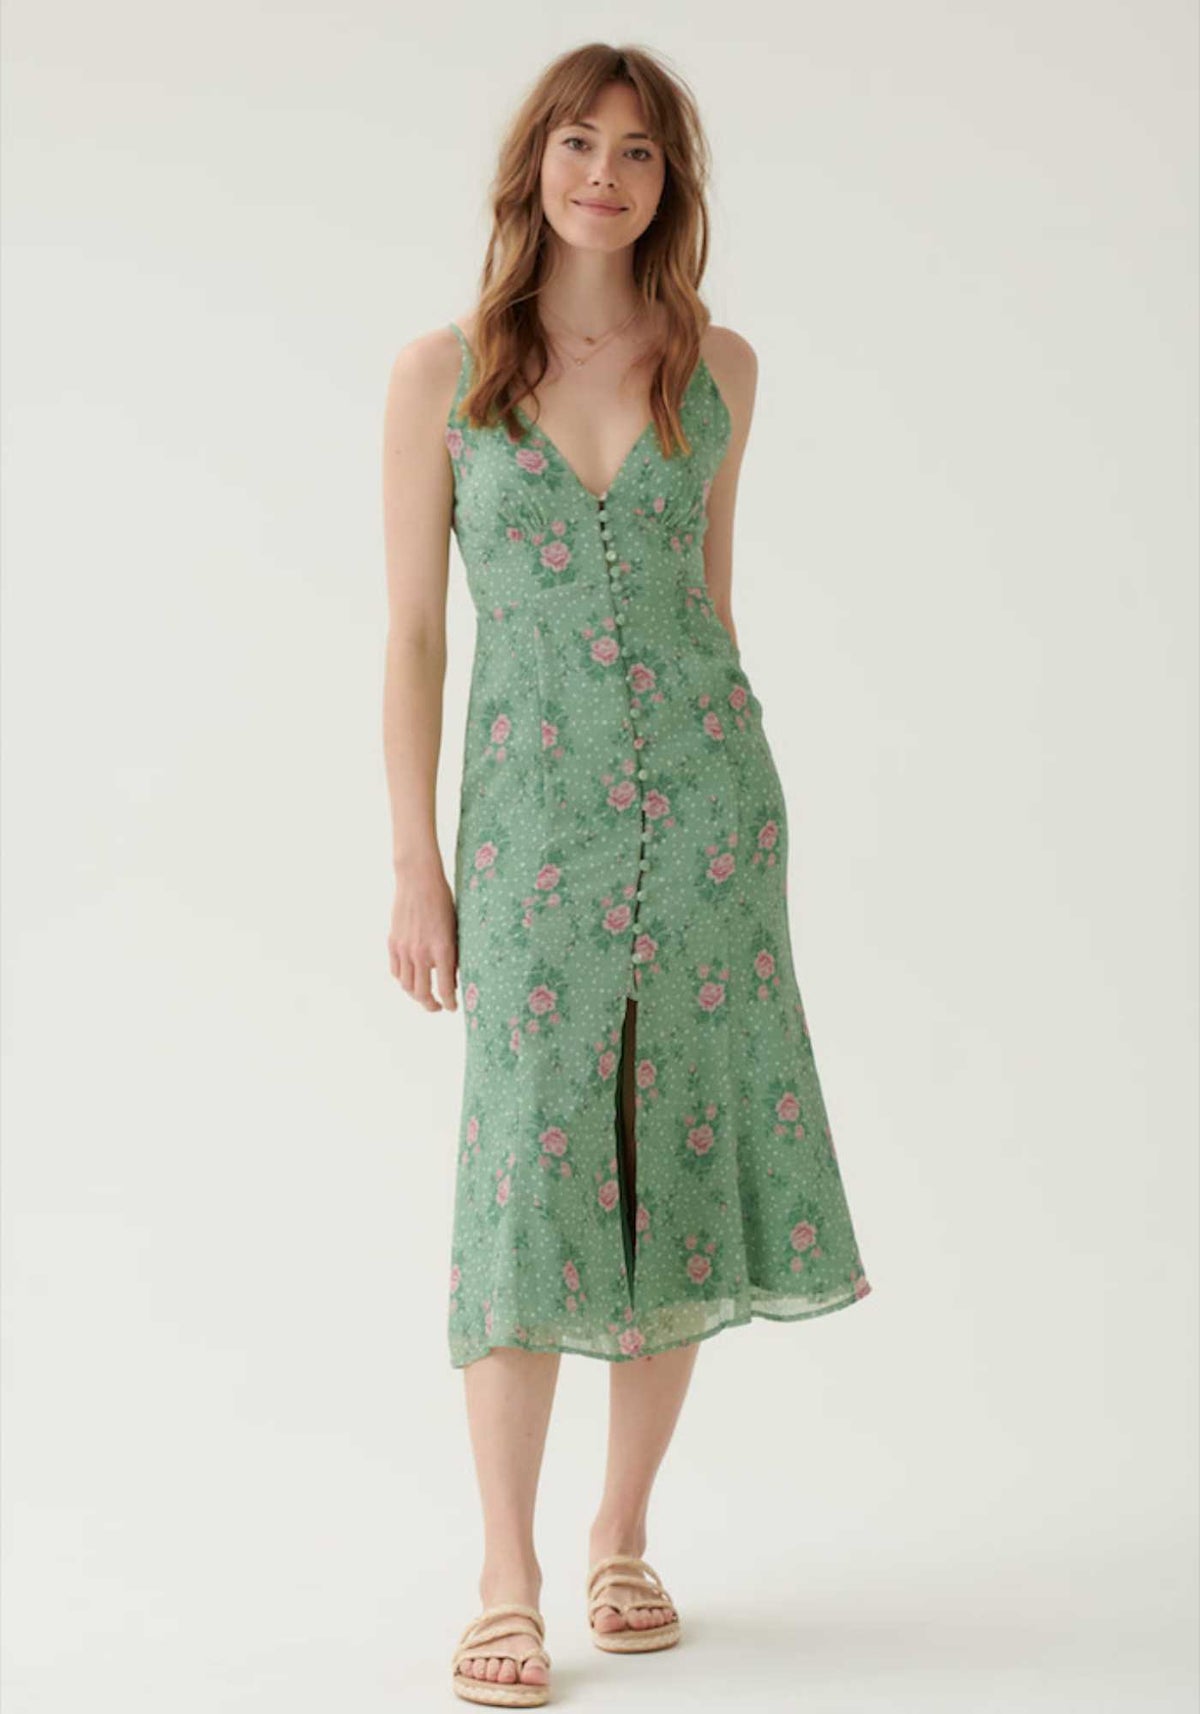 Button Down Detail Midi Dress in Green Pink Floral- Outlet